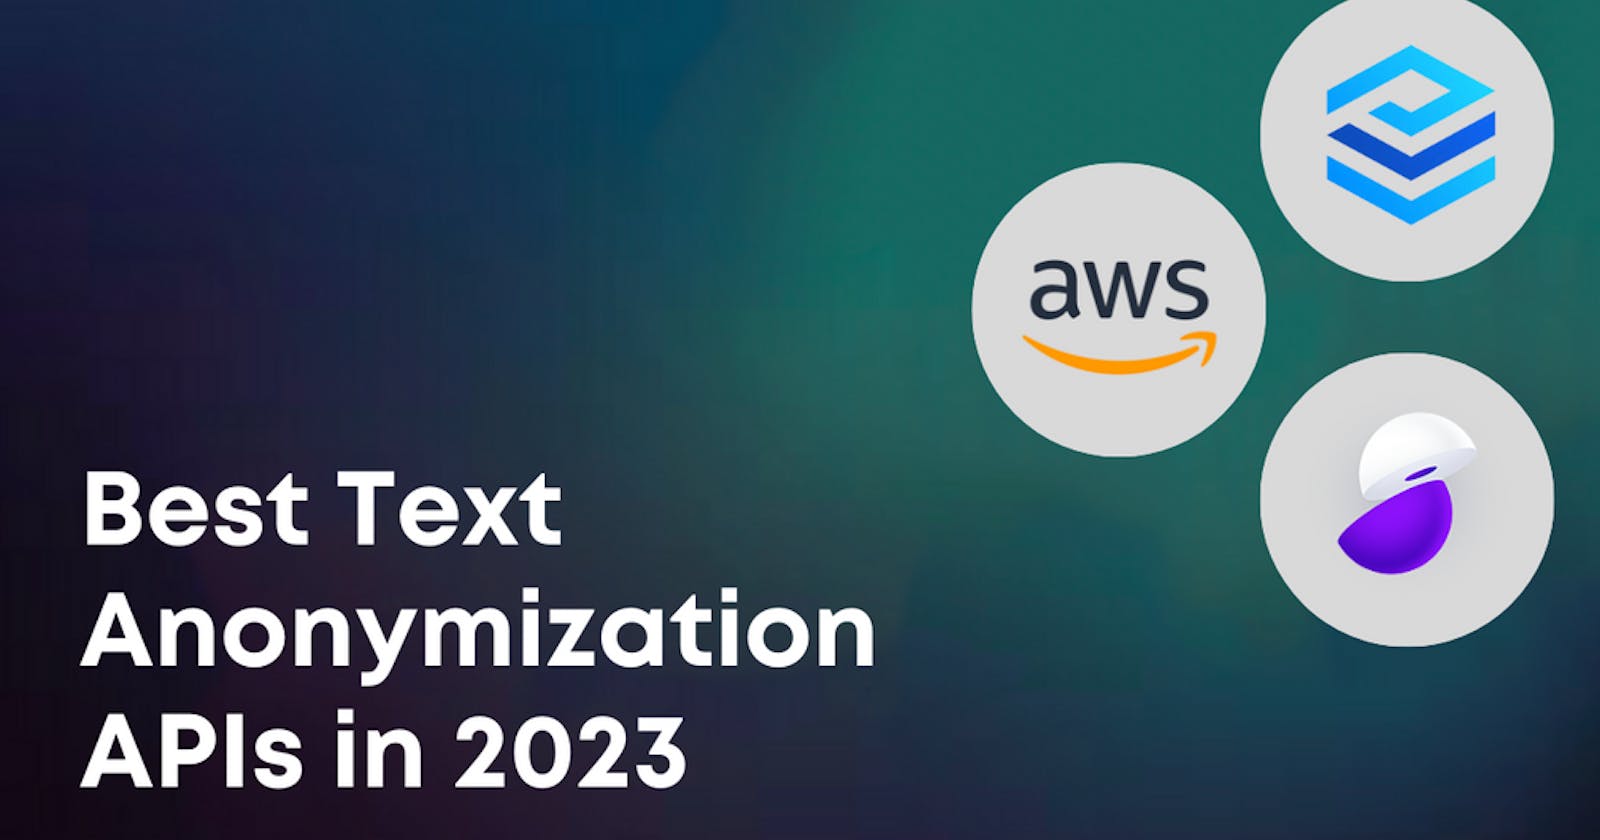 Best Text Anonymization APIs in 2023